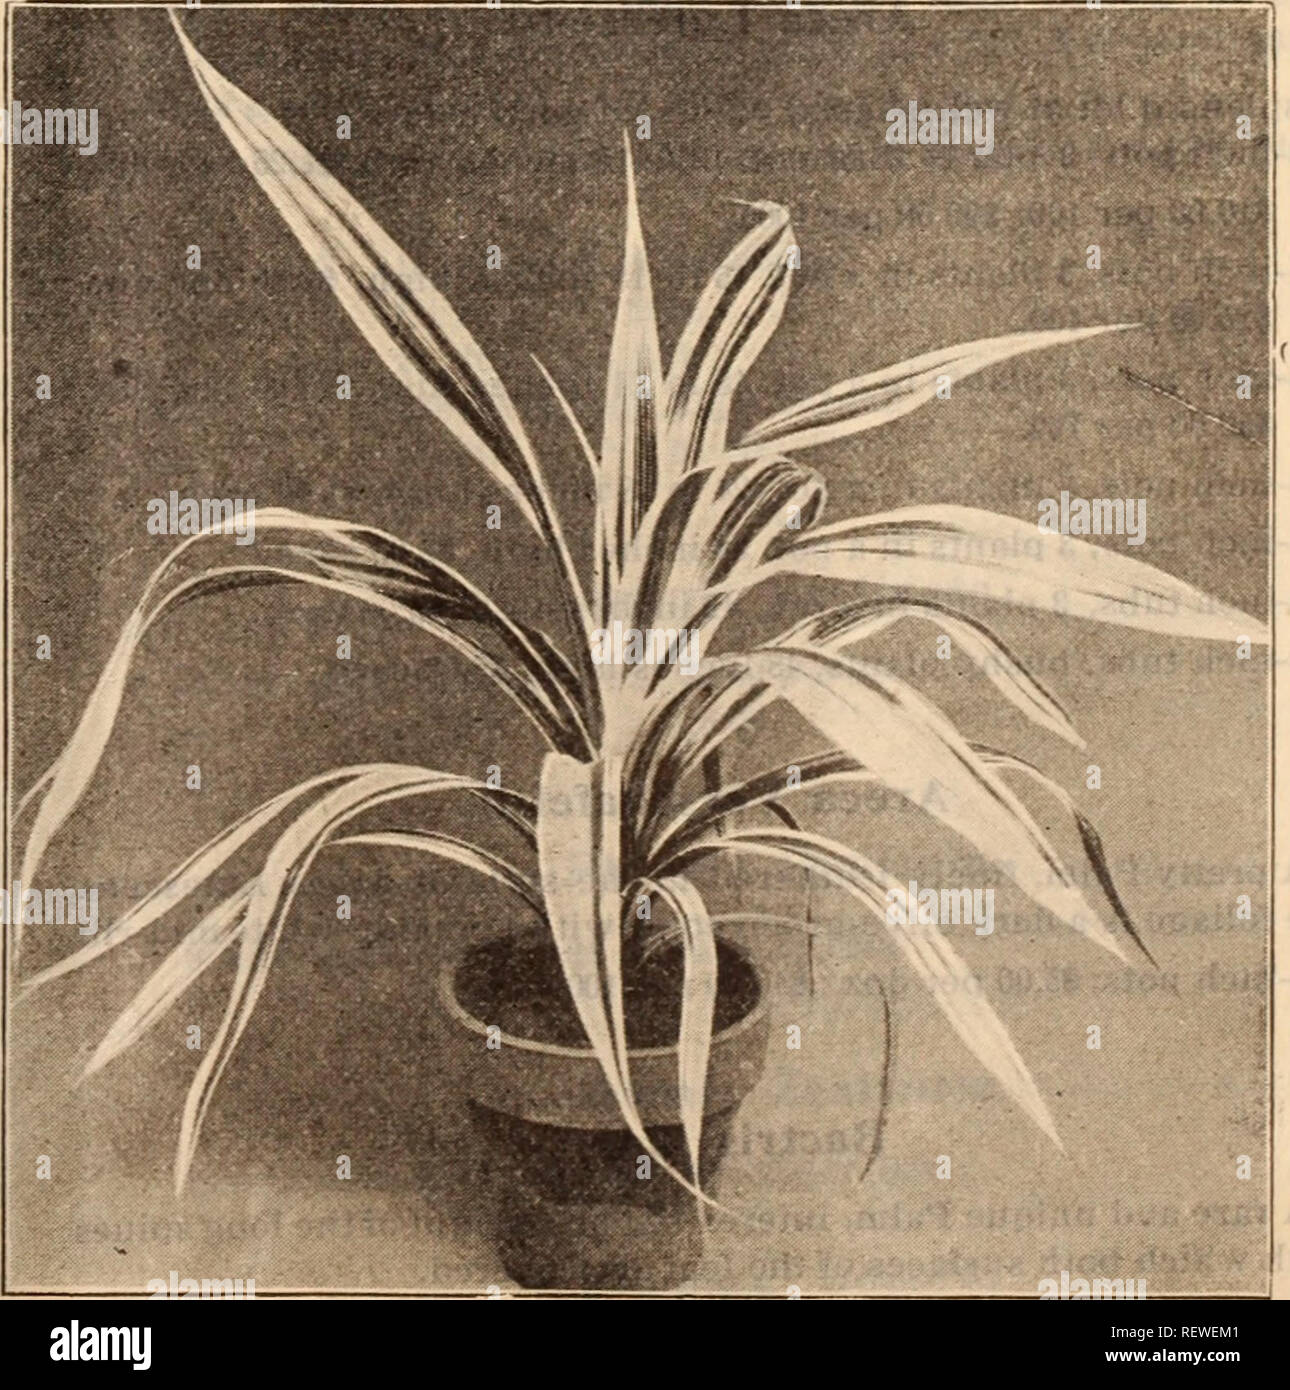 . Dreer's wholesale price list / Henry A. Dreer.. Nursery Catalogue. MARANTA VITTATA NEPENTHES (Pitcher Plant) Gracilis. 2'/&lt;i-inch pots, Isolepis. cts. per doz.; $4.00 per 100. Lagerstroemia Crape Myrtle). Indica. Delicate soft-pink. Alba. Pure white. Strong plants, 5 and 6 inch pots, 35 cts. each. Pandanus Pacificus. A beautiful species with broad, massive dark green foliage. Each 4-inch pots ^50 R &quot; =' 1 00 Lapageria. Rosea. 5-inch pots, $1.50 each. | Alba. 5-inch pots, $2.00 each. Marantas, Six Choice Varieties. Jnsignes Makoyana 'Rosea Lineata Each . 35 50 Each Sanderi 75 Van den  Stock Photo